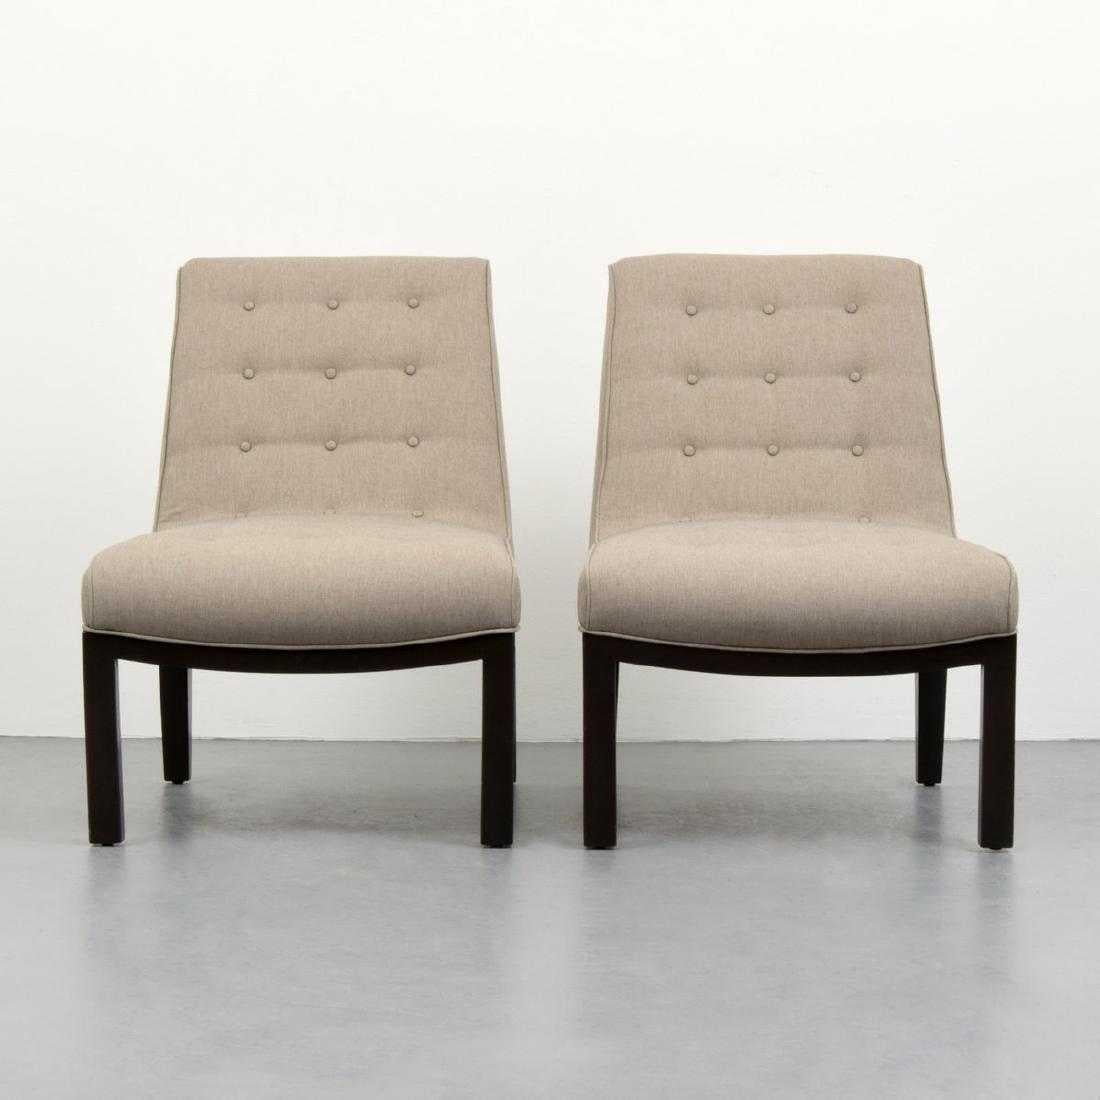 Pair of slipper chairs by Edward Wormley for Dunbar. Chair is model 5000/5000A. References: Dunbar- Fine Furniture of the 1950s, Leslie Pina, pg. 67; Dunbar/Dux, General Interiors Catalog, unpaginated.

Markings: Dunbar plaque.
 